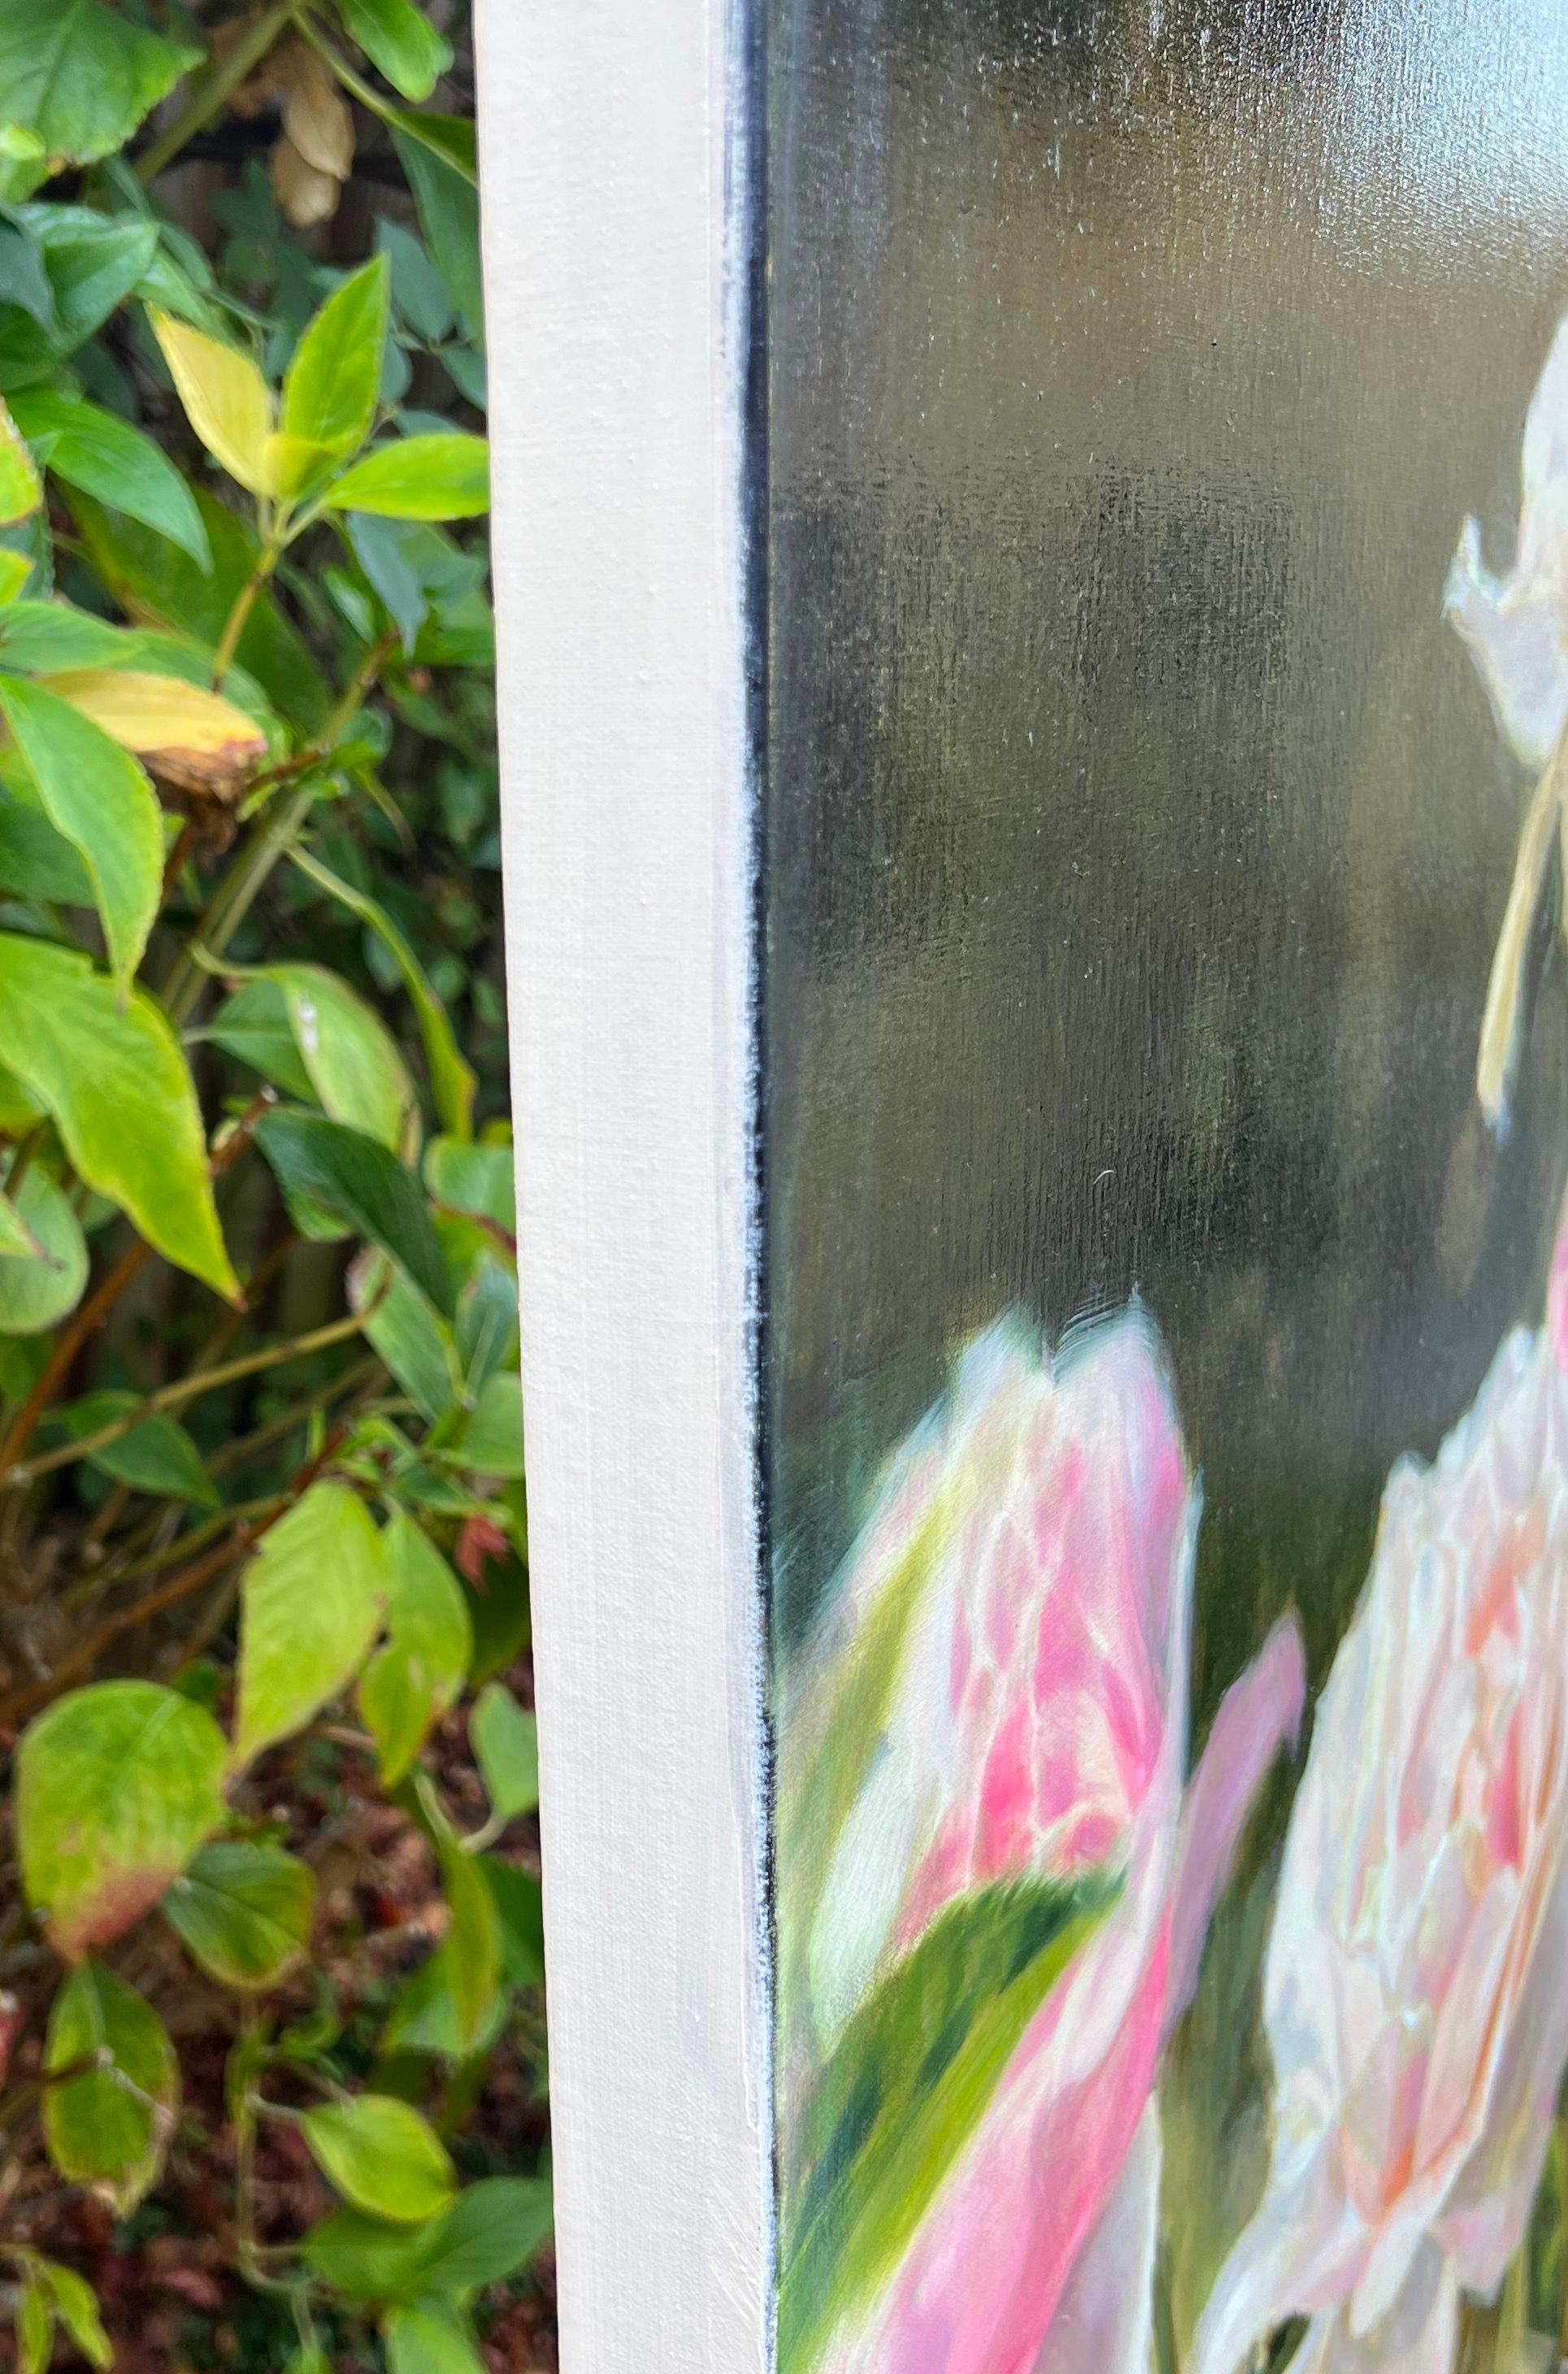 <p>Artist Comments<br />Fully bloomed pink roses flourish in the bright sunlight. The soft edges of their petals display their delicate nature. For the artist, this serves as a metaphor for life and love. The grisaille underpainting and the glaze